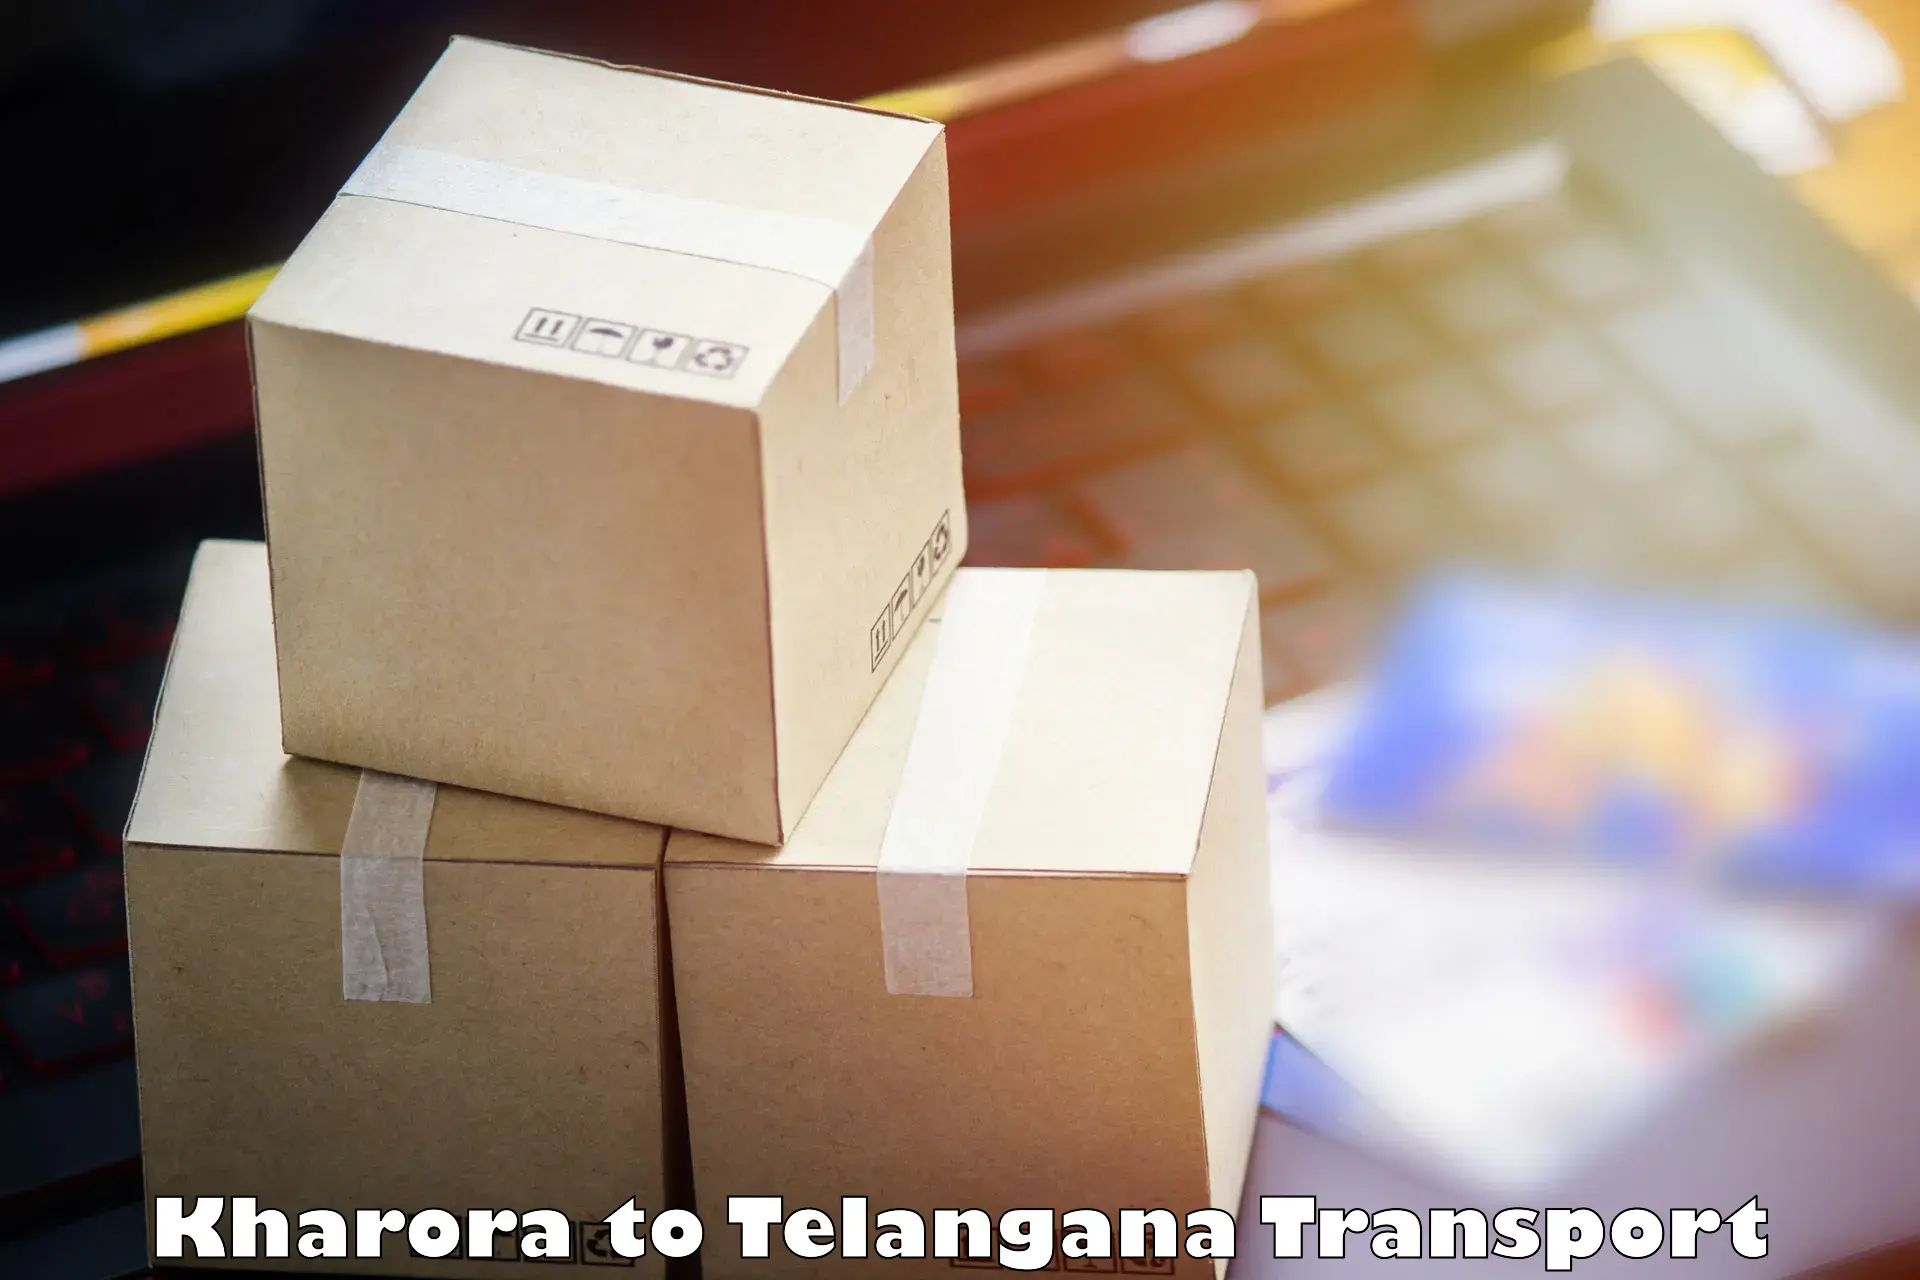 Parcel transport services in Kharora to Sangareddy